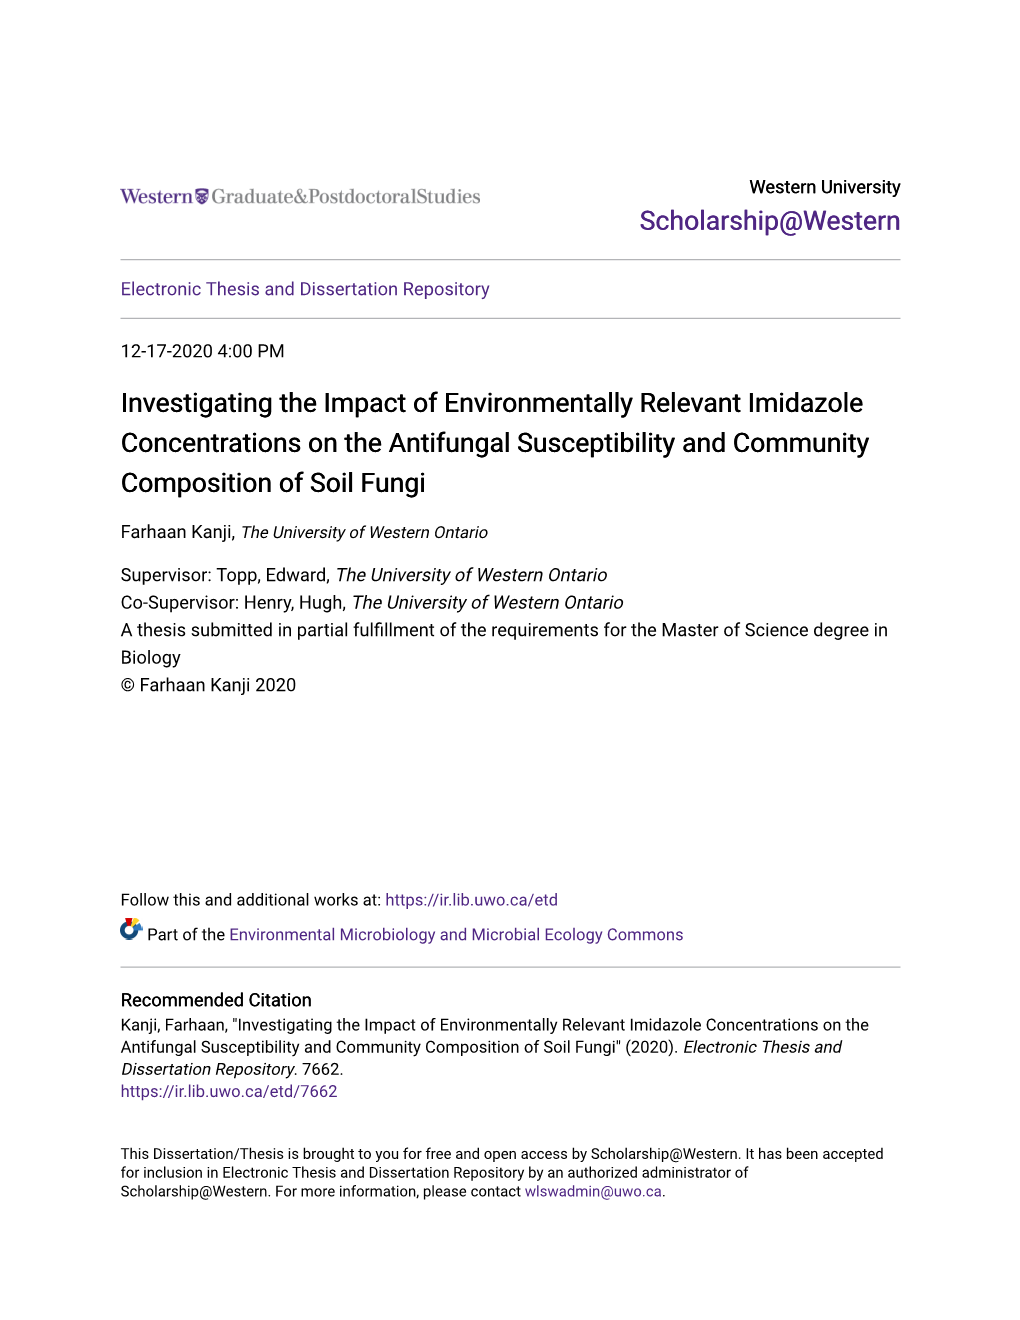 Investigating the Impact of Environmentally Relevant Imidazole Concentrations on the Antifungal Susceptibility and Community Composition of Soil Fungi